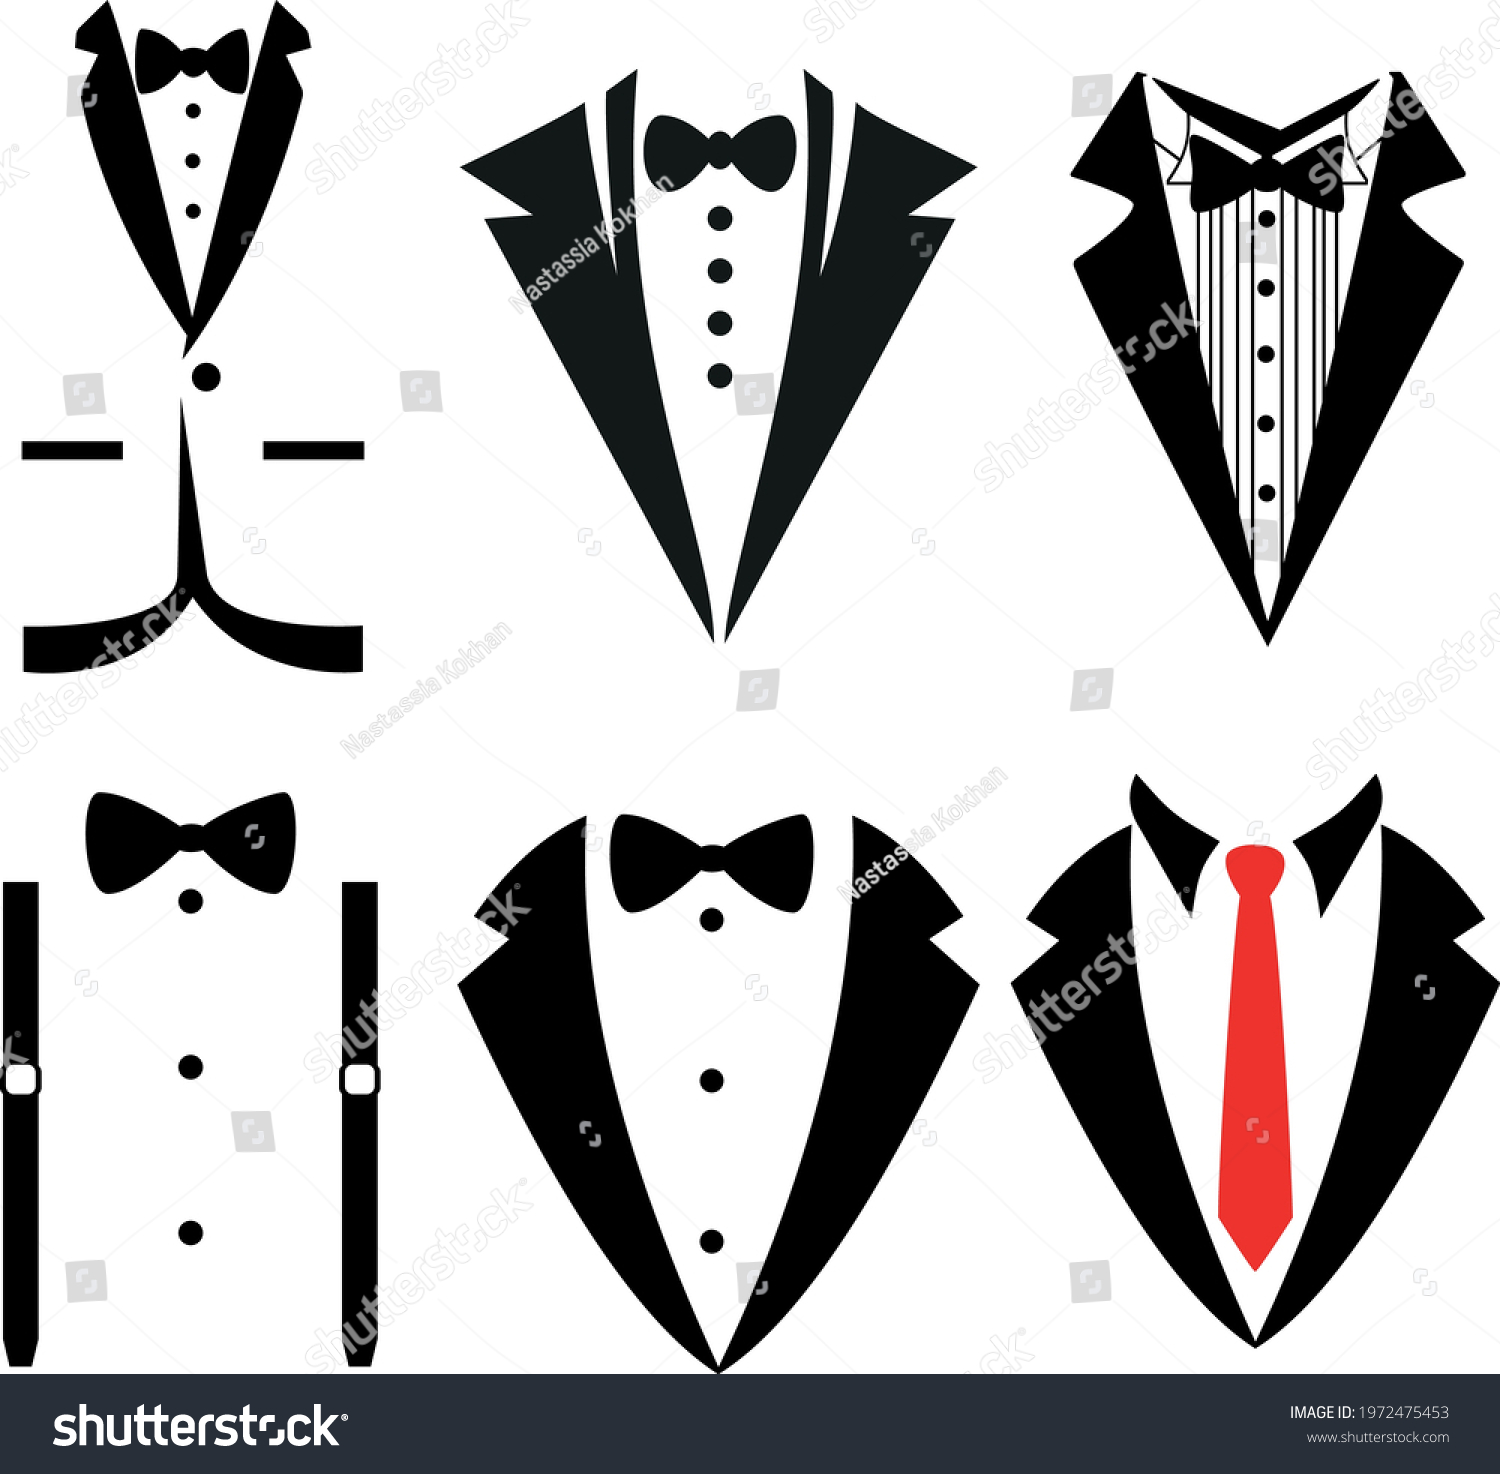 SVG of Wedding tuxedo Svg Bow tie, suit vector Illustration isolated on white background.Tuxedo shirt design. Gentleman svg Clipart Decor Cut Files for Cricut and Silhouette svg